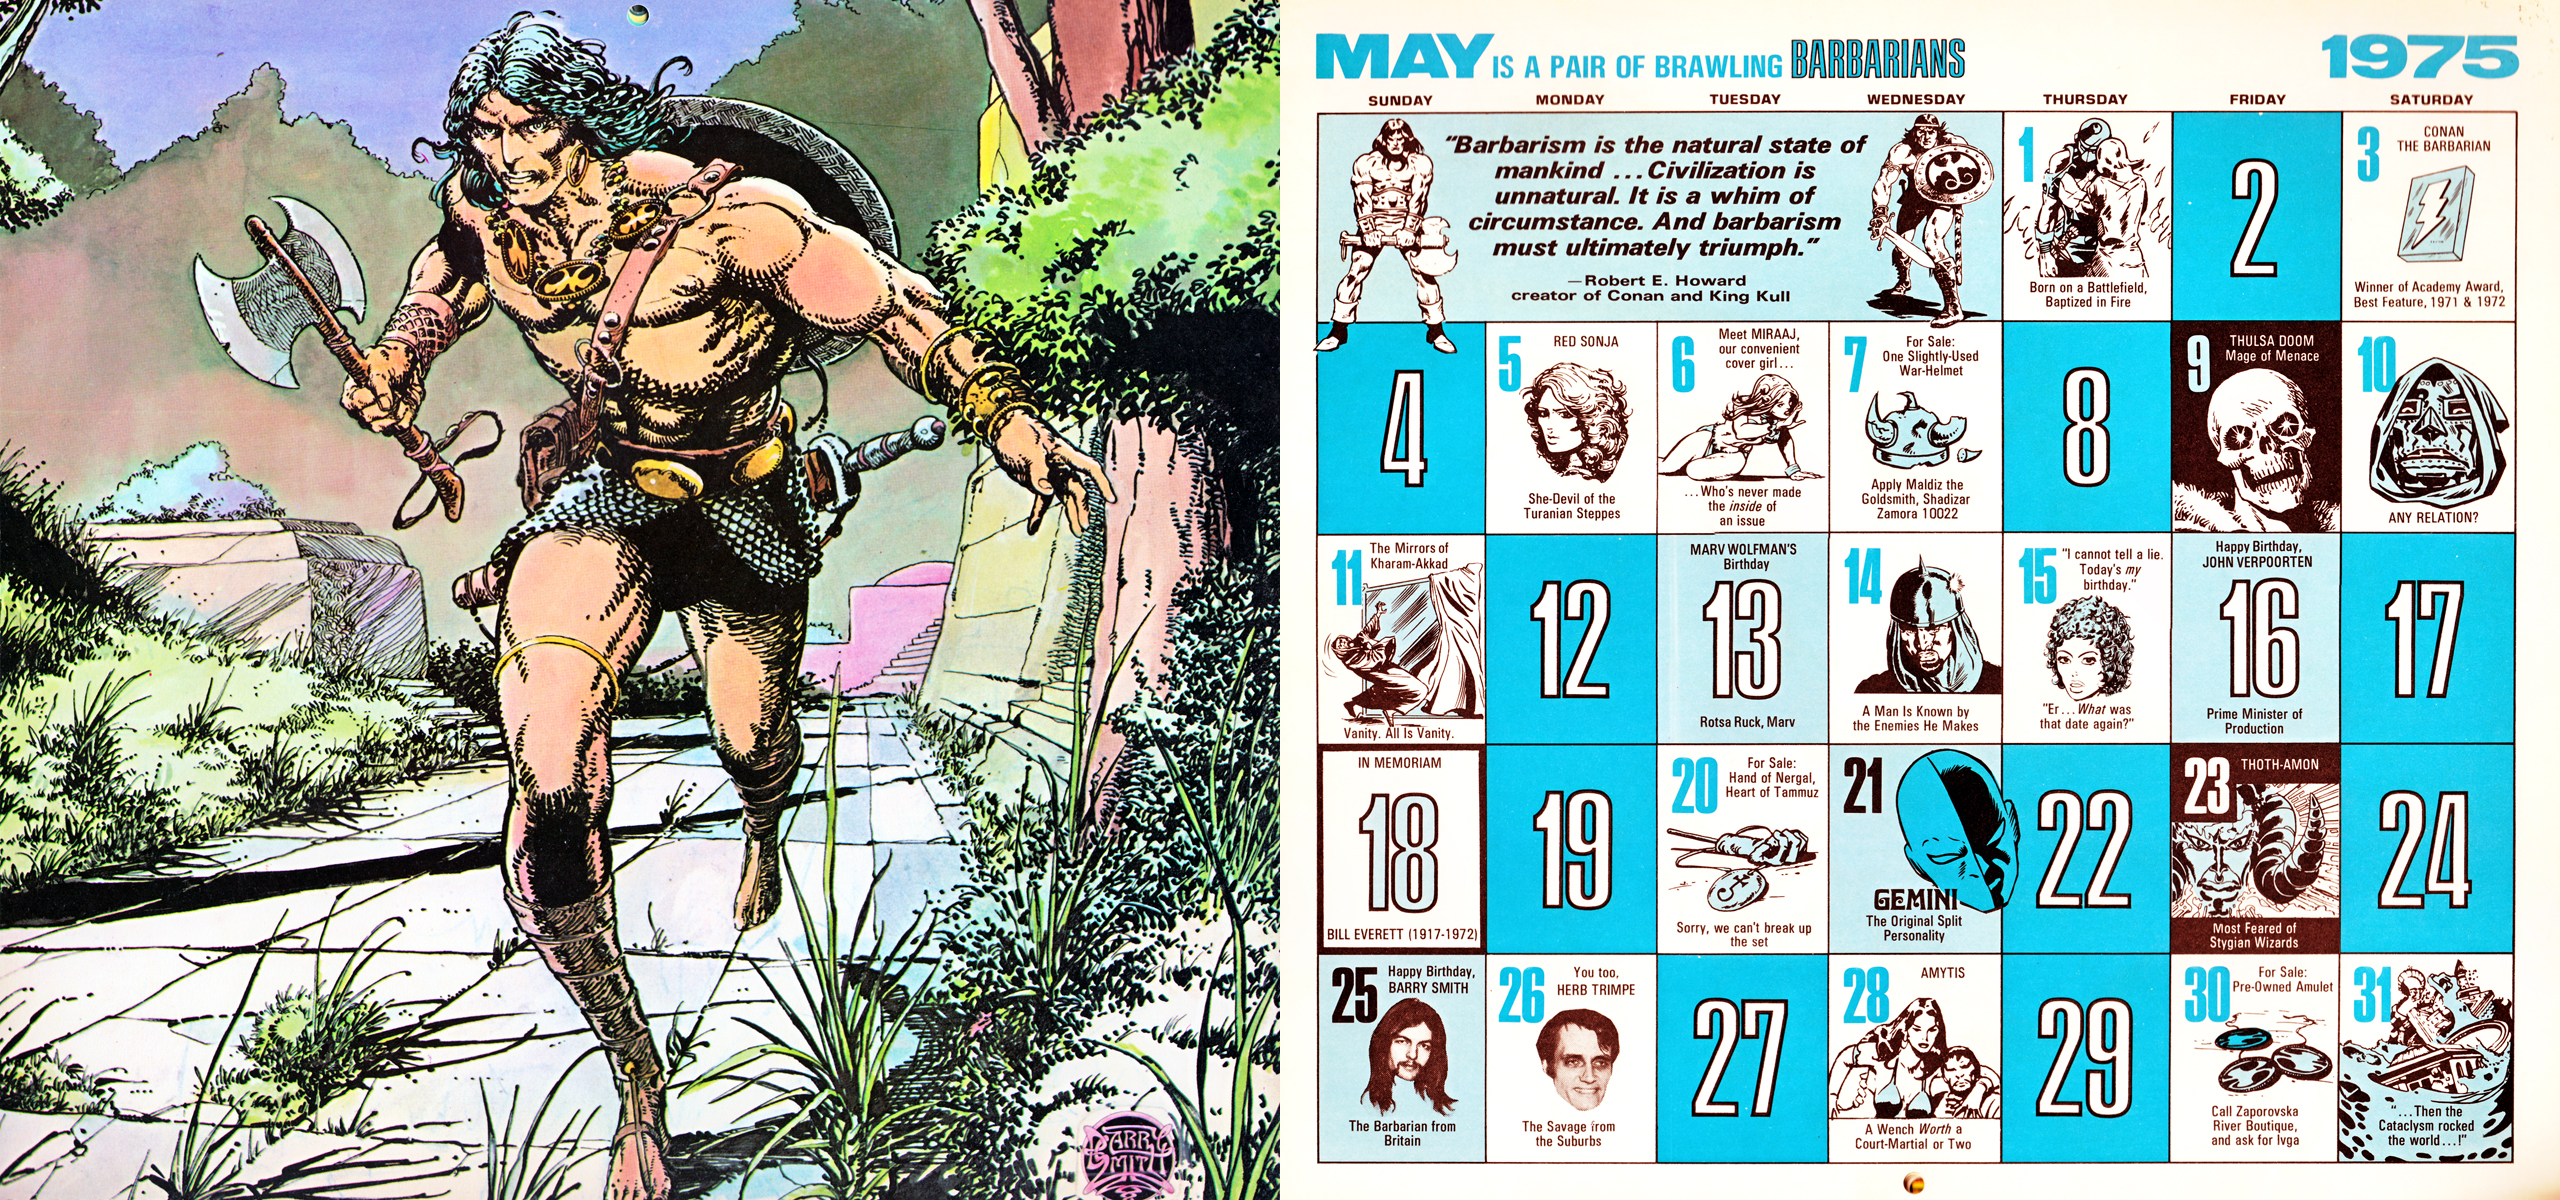 Celebrate New 1975 The Mighty Marvel Way